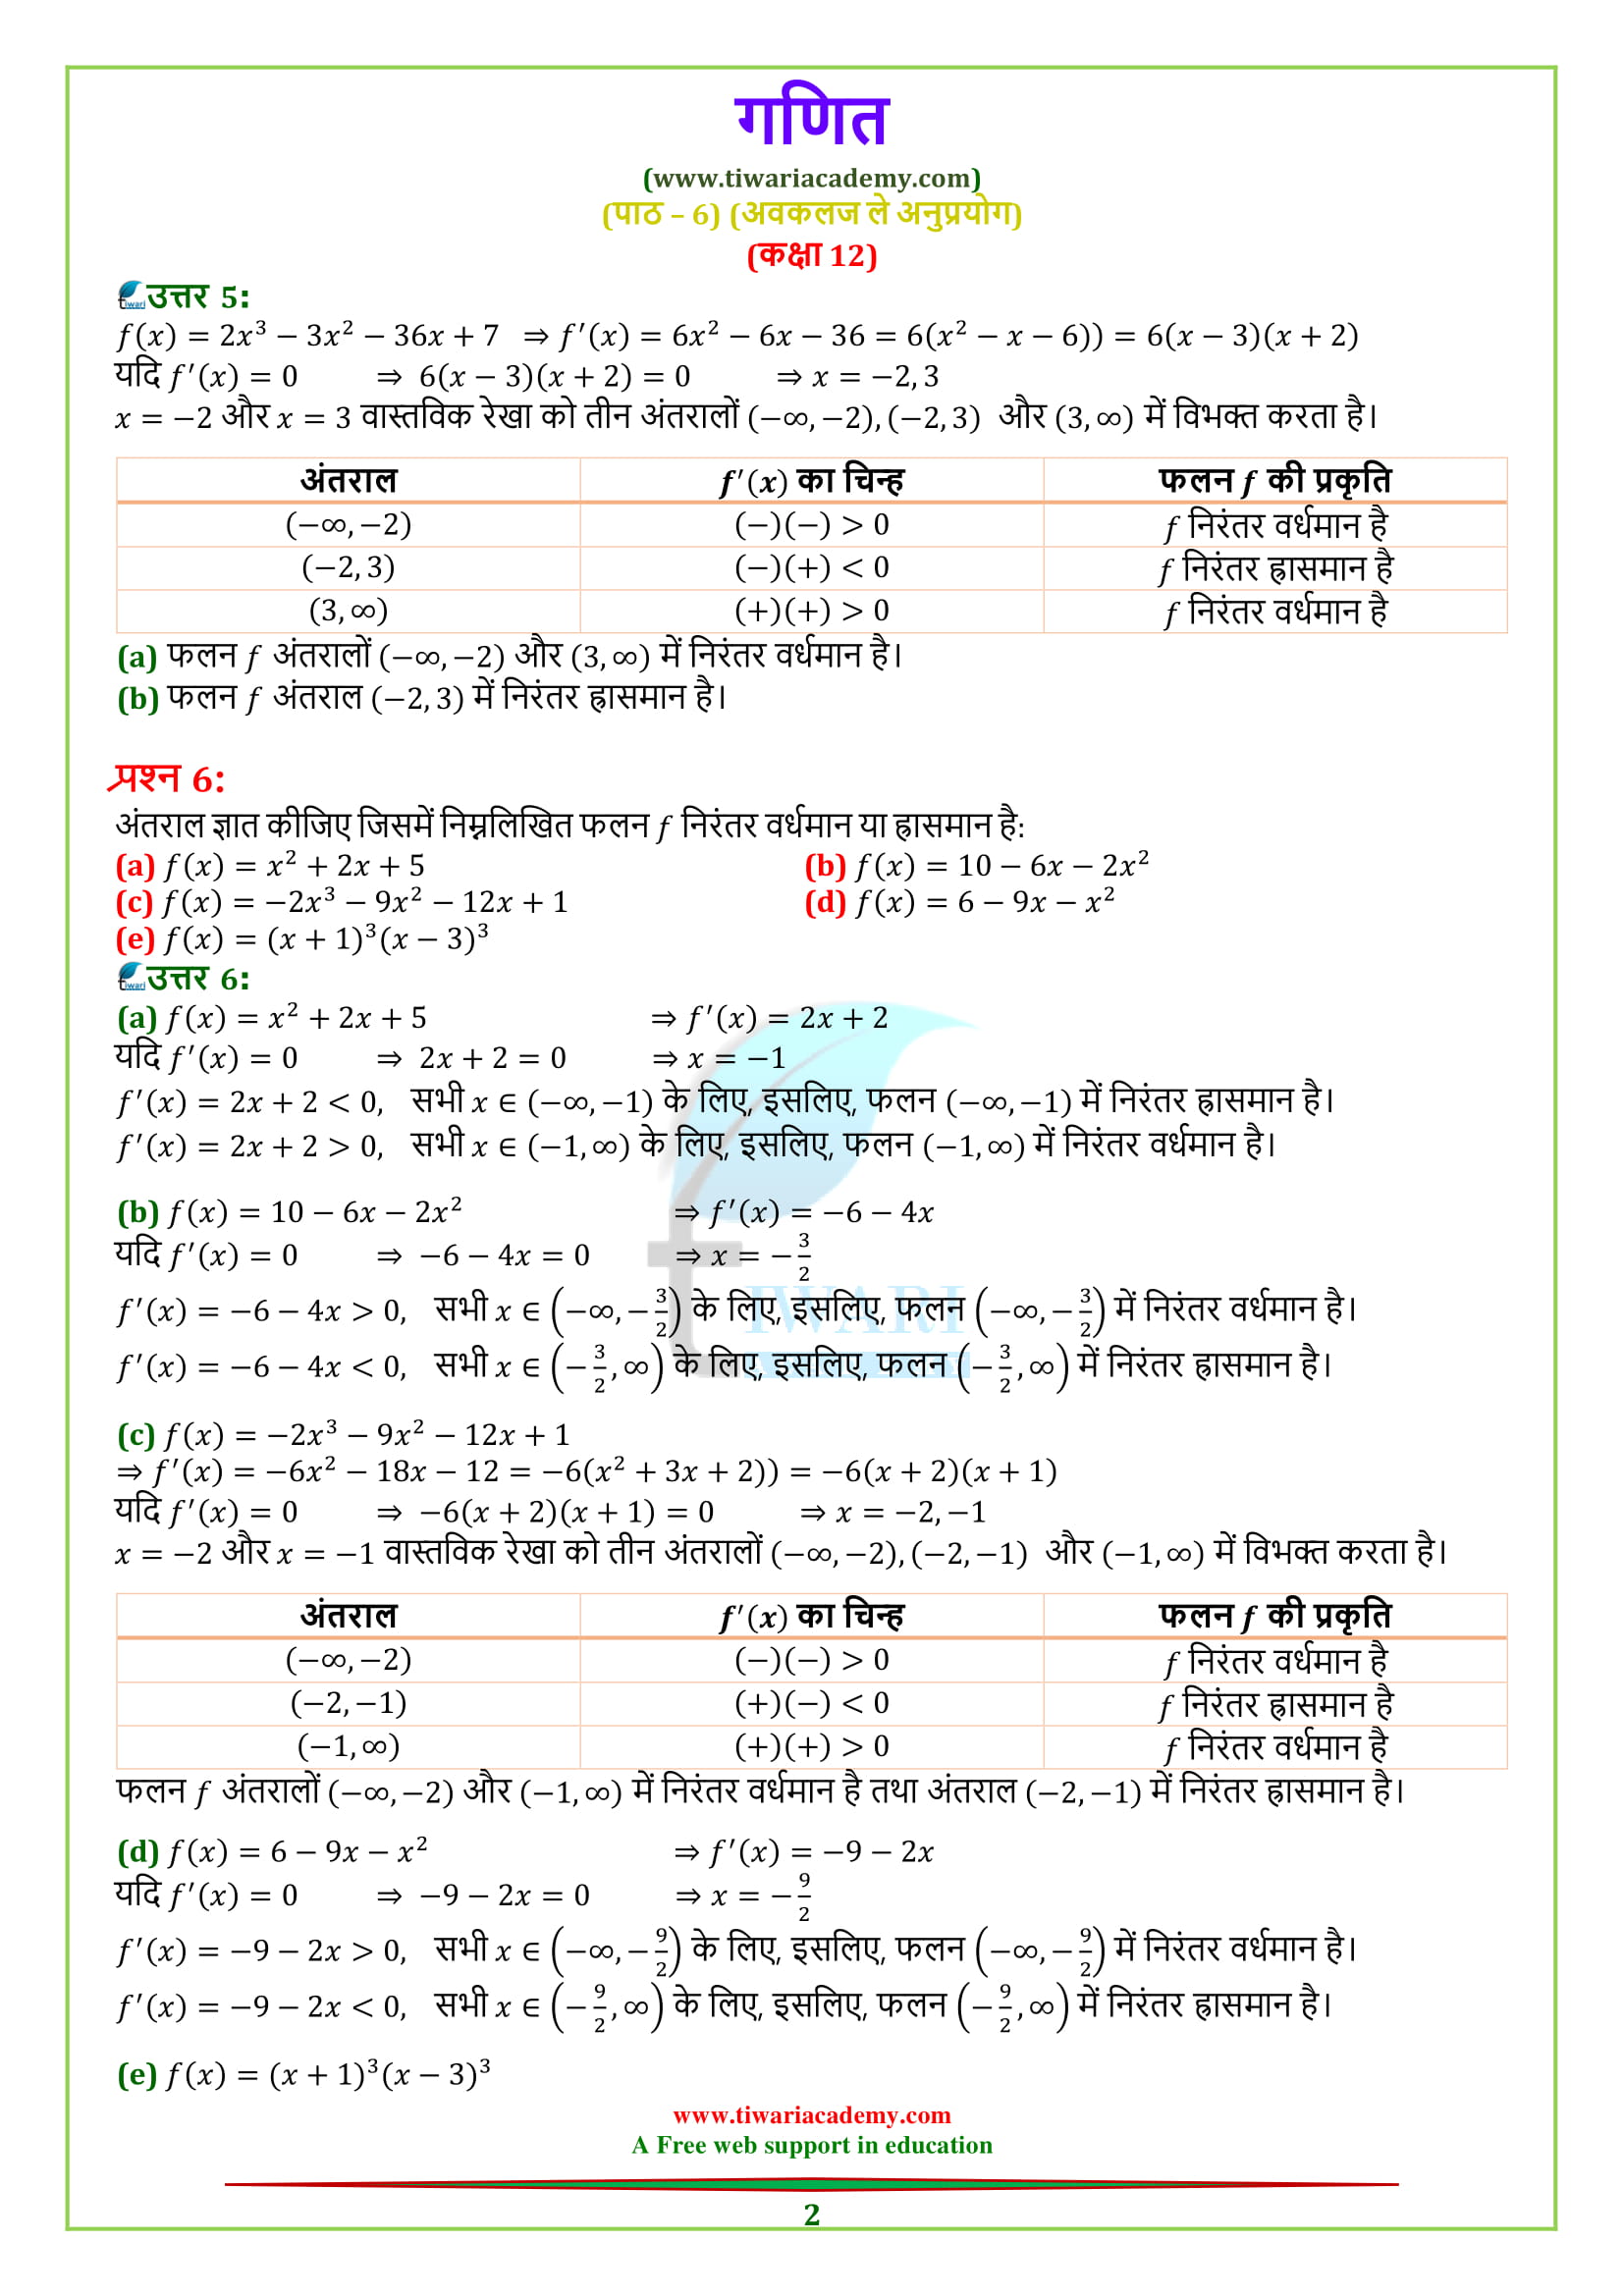 NCERT Solutions for Class 12 Maths Chapter 6 Exercise 6.2 for cbse and up board 2018-2019.